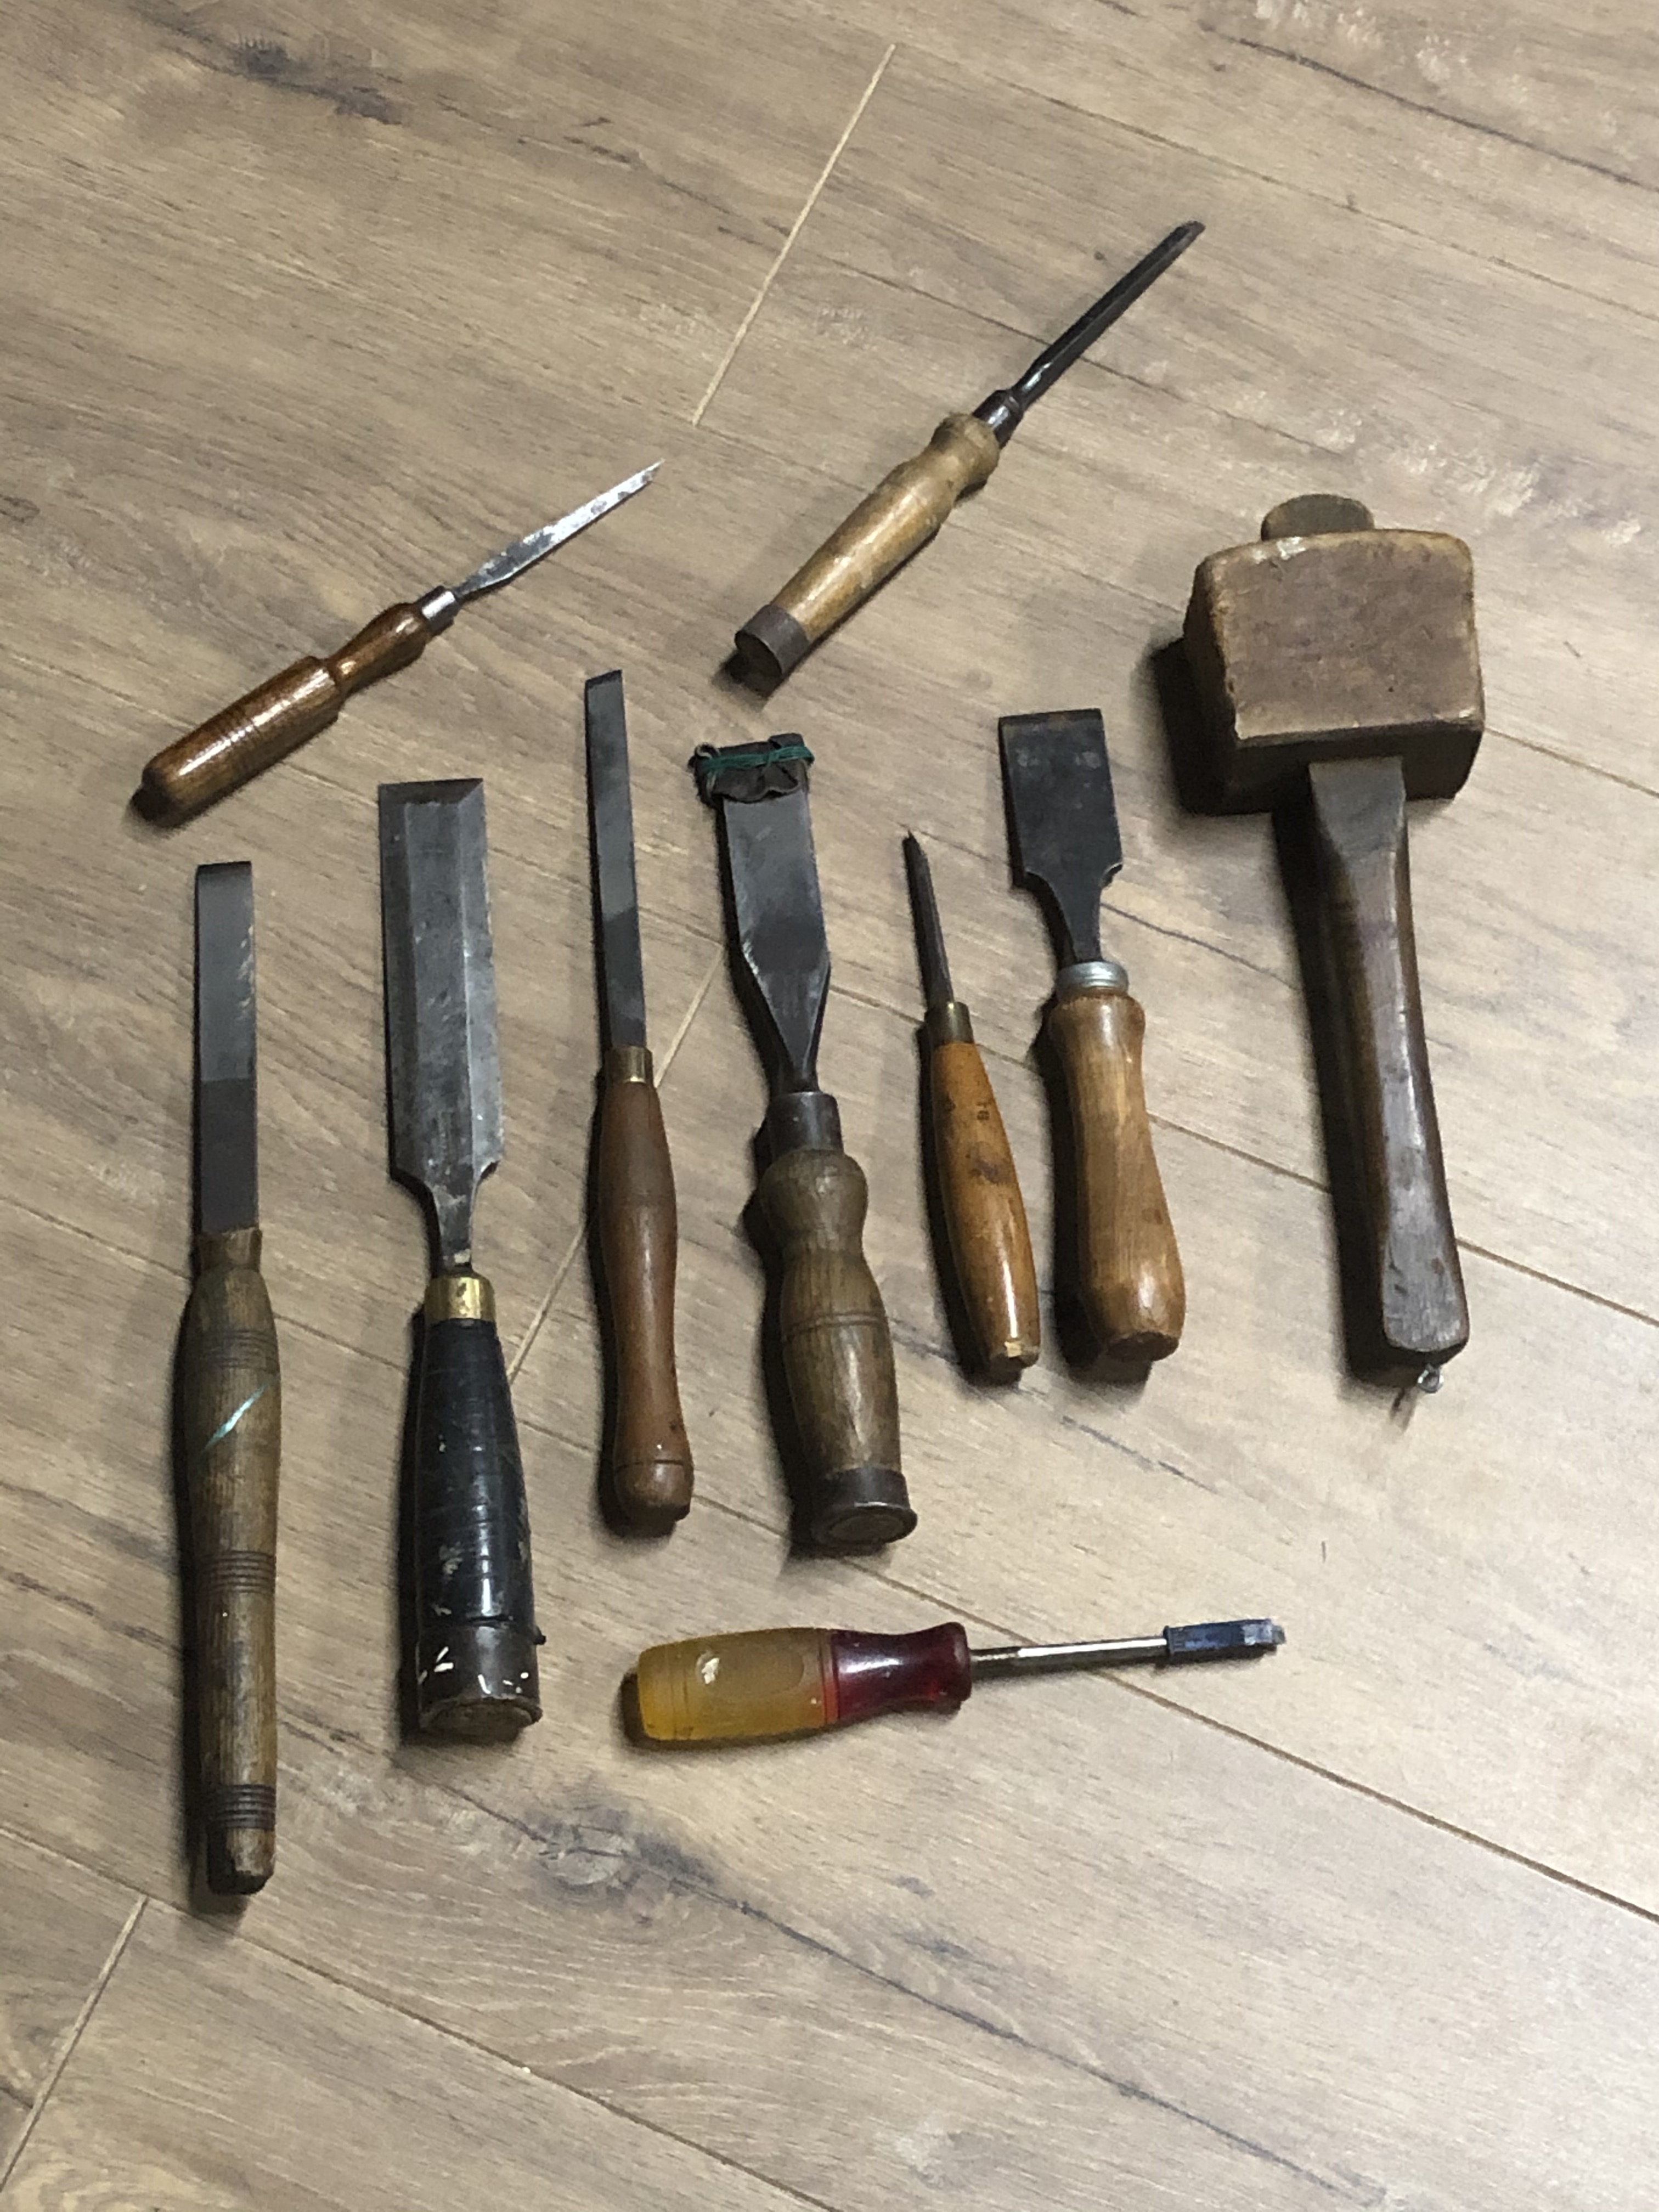 A LOT OF ASSORTED VINTAGE TOOLS INC CHISELS CARPENTERS MALLET ETC